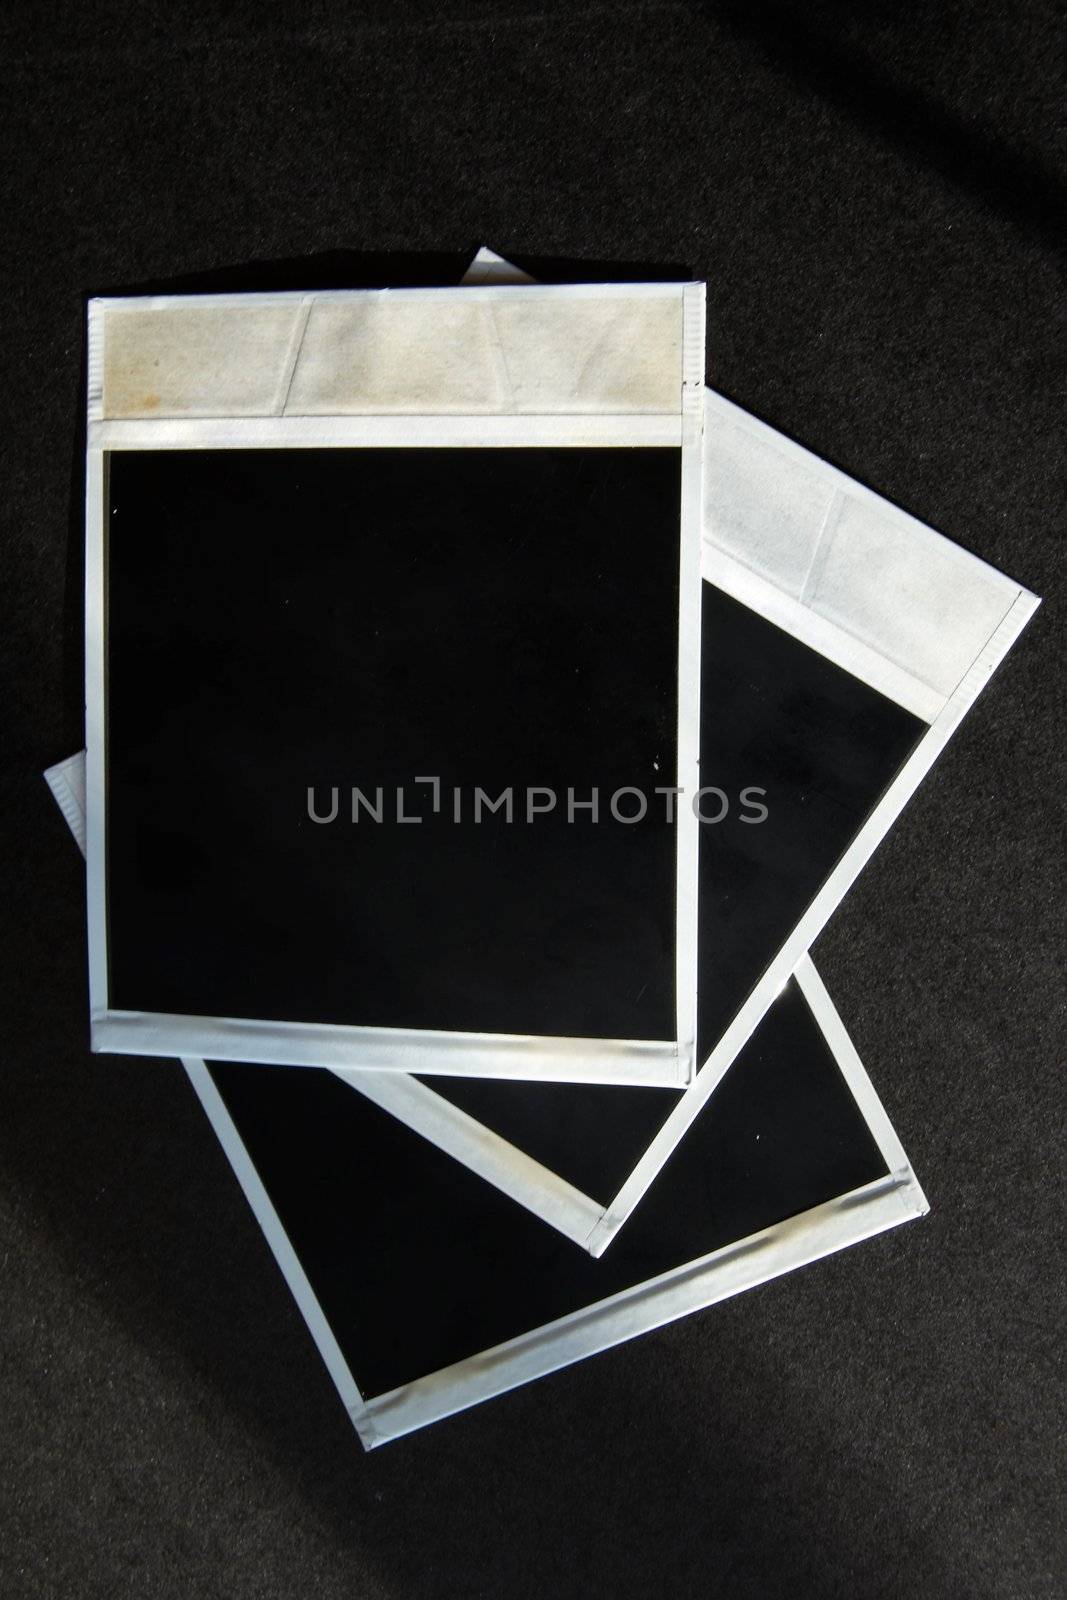 An image of white frames